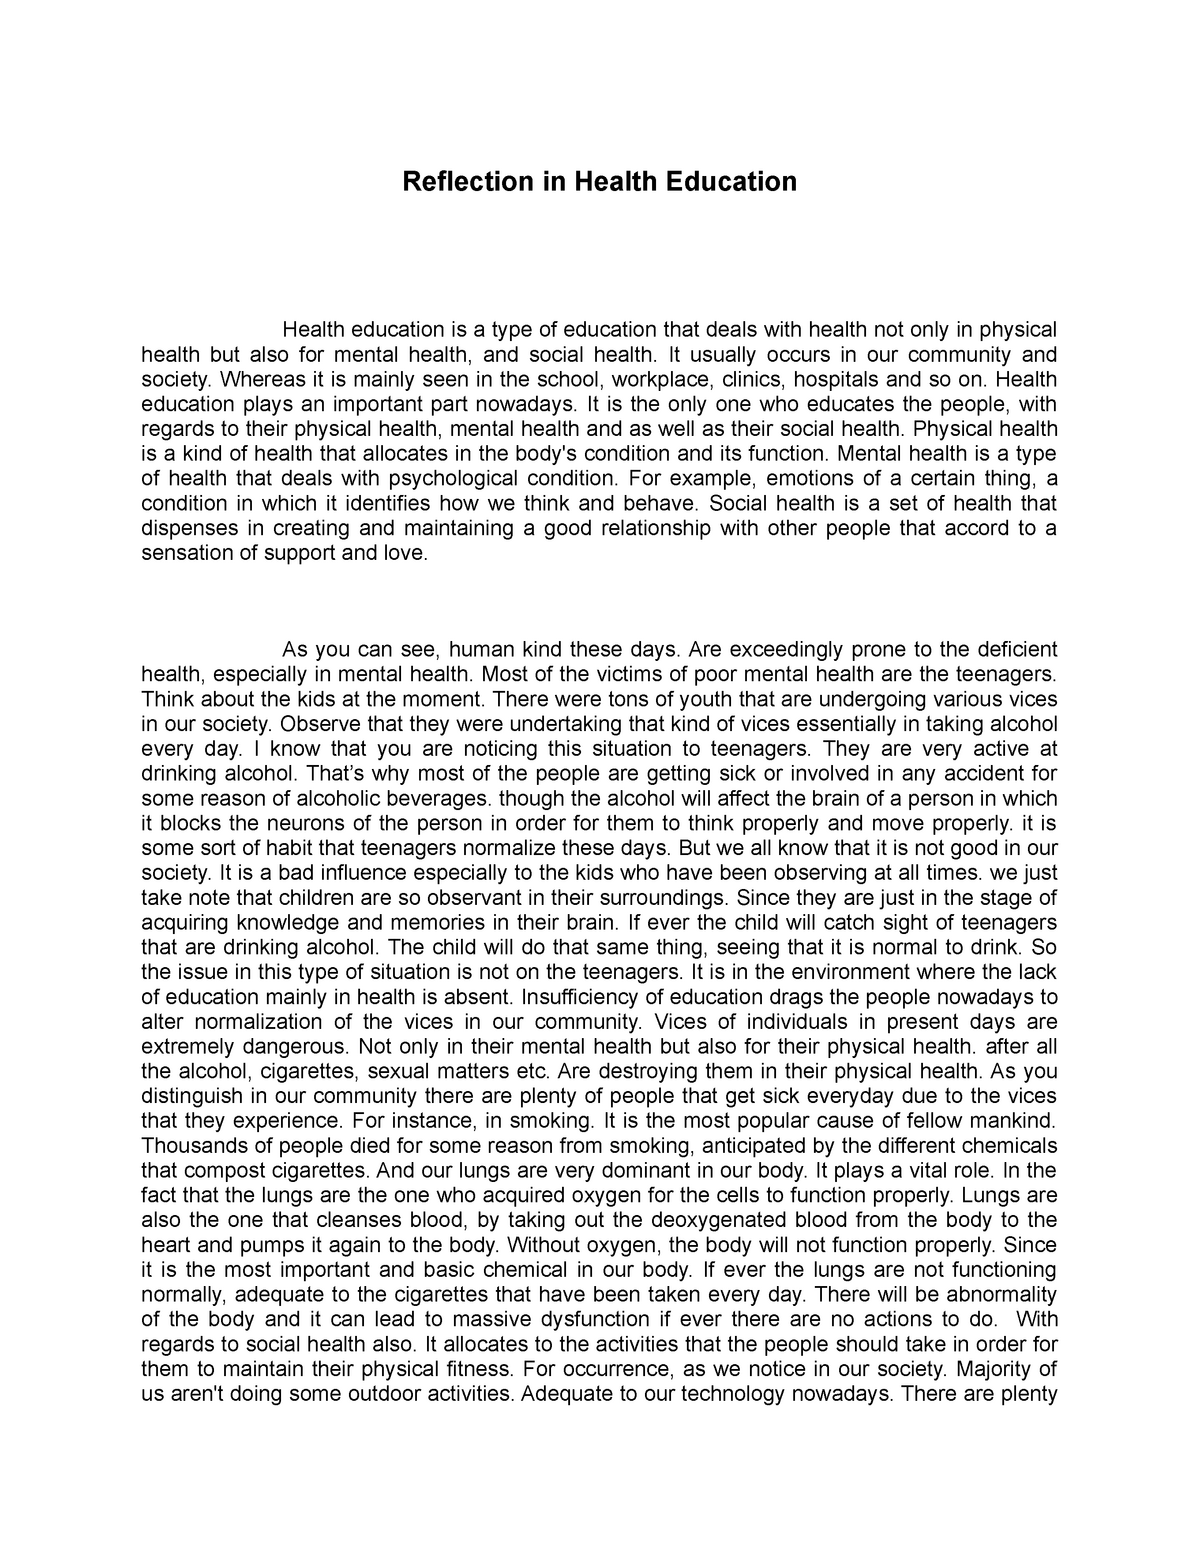 reflection paper about health education